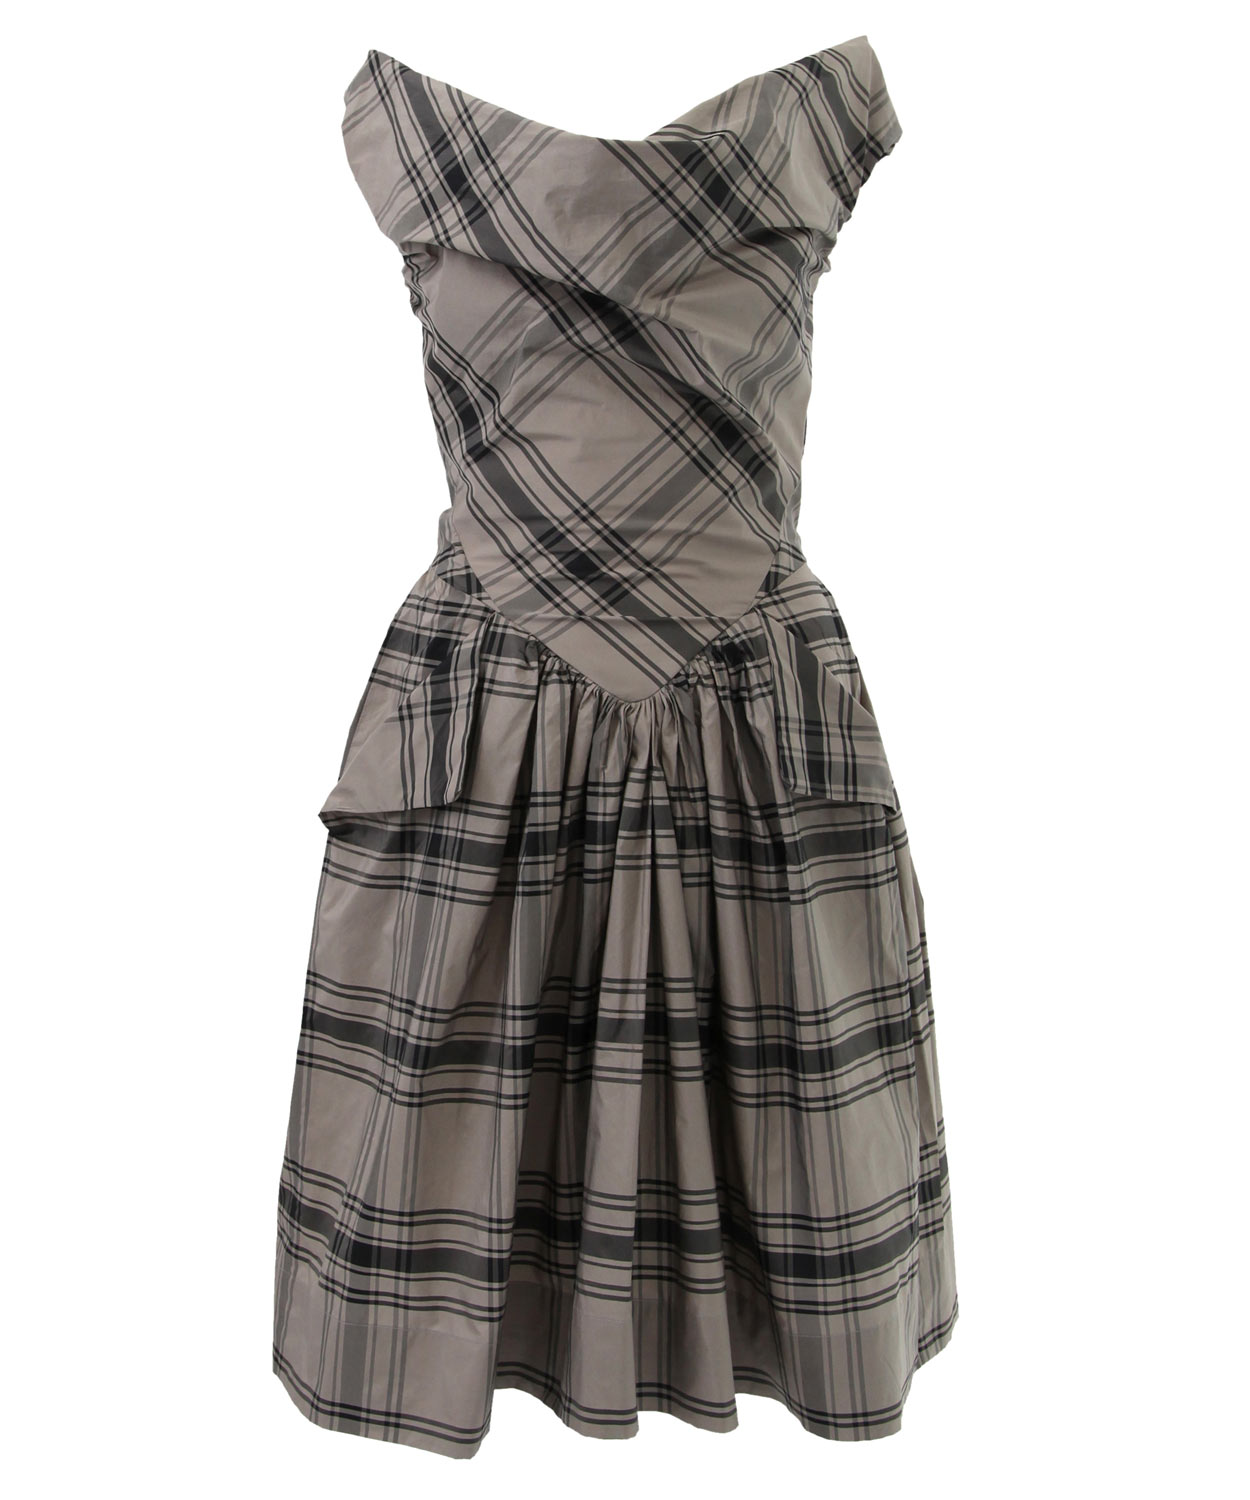 Lyst - Vivienne Westwood Anglomania Grey Tartan Marghi Dress in Gray